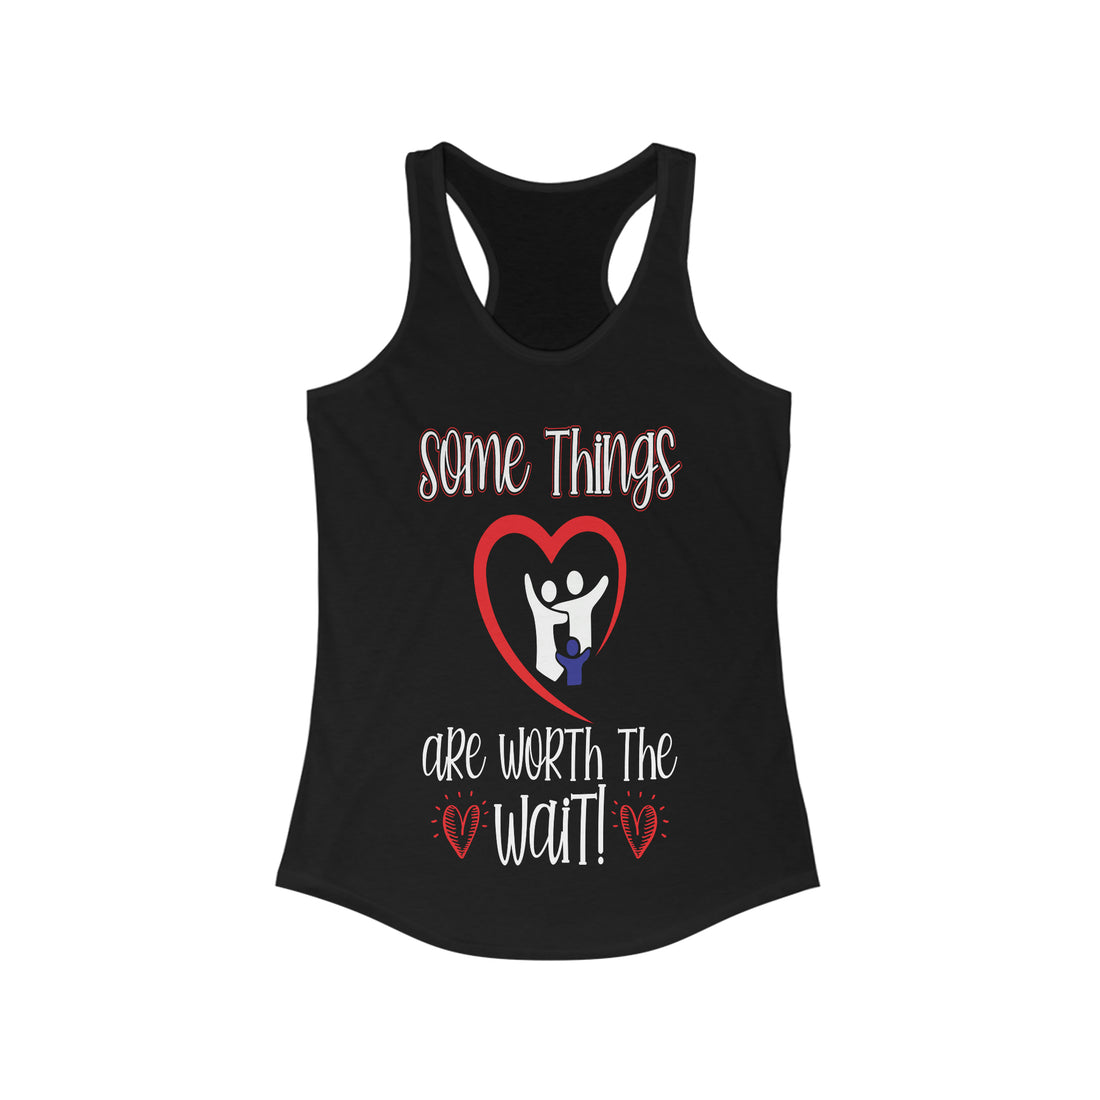 Some Things Are Worth The Wait - Racerback Tank